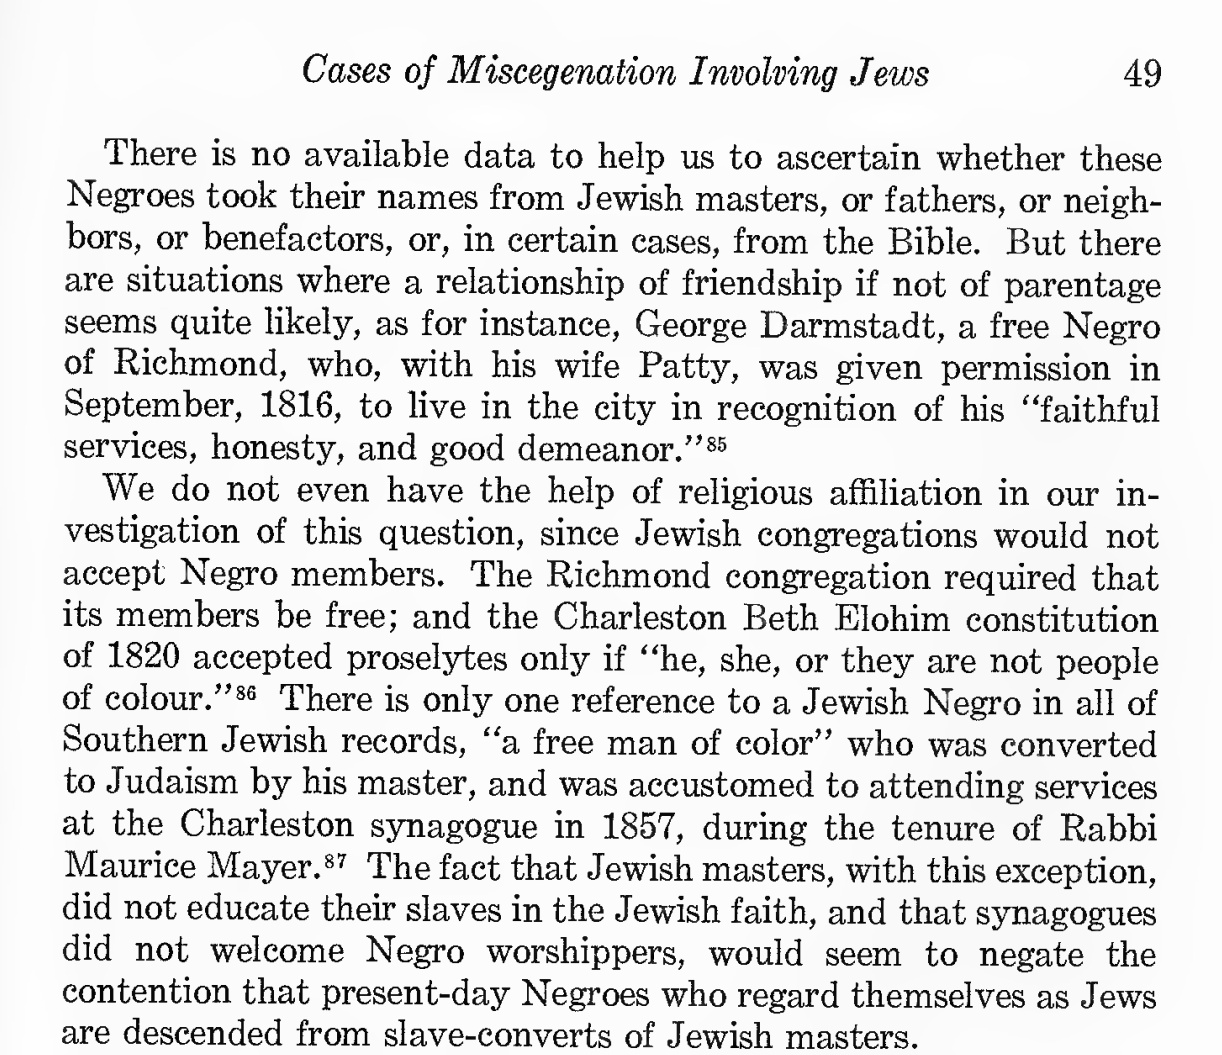 Negress Concubines of Jewish slave owners